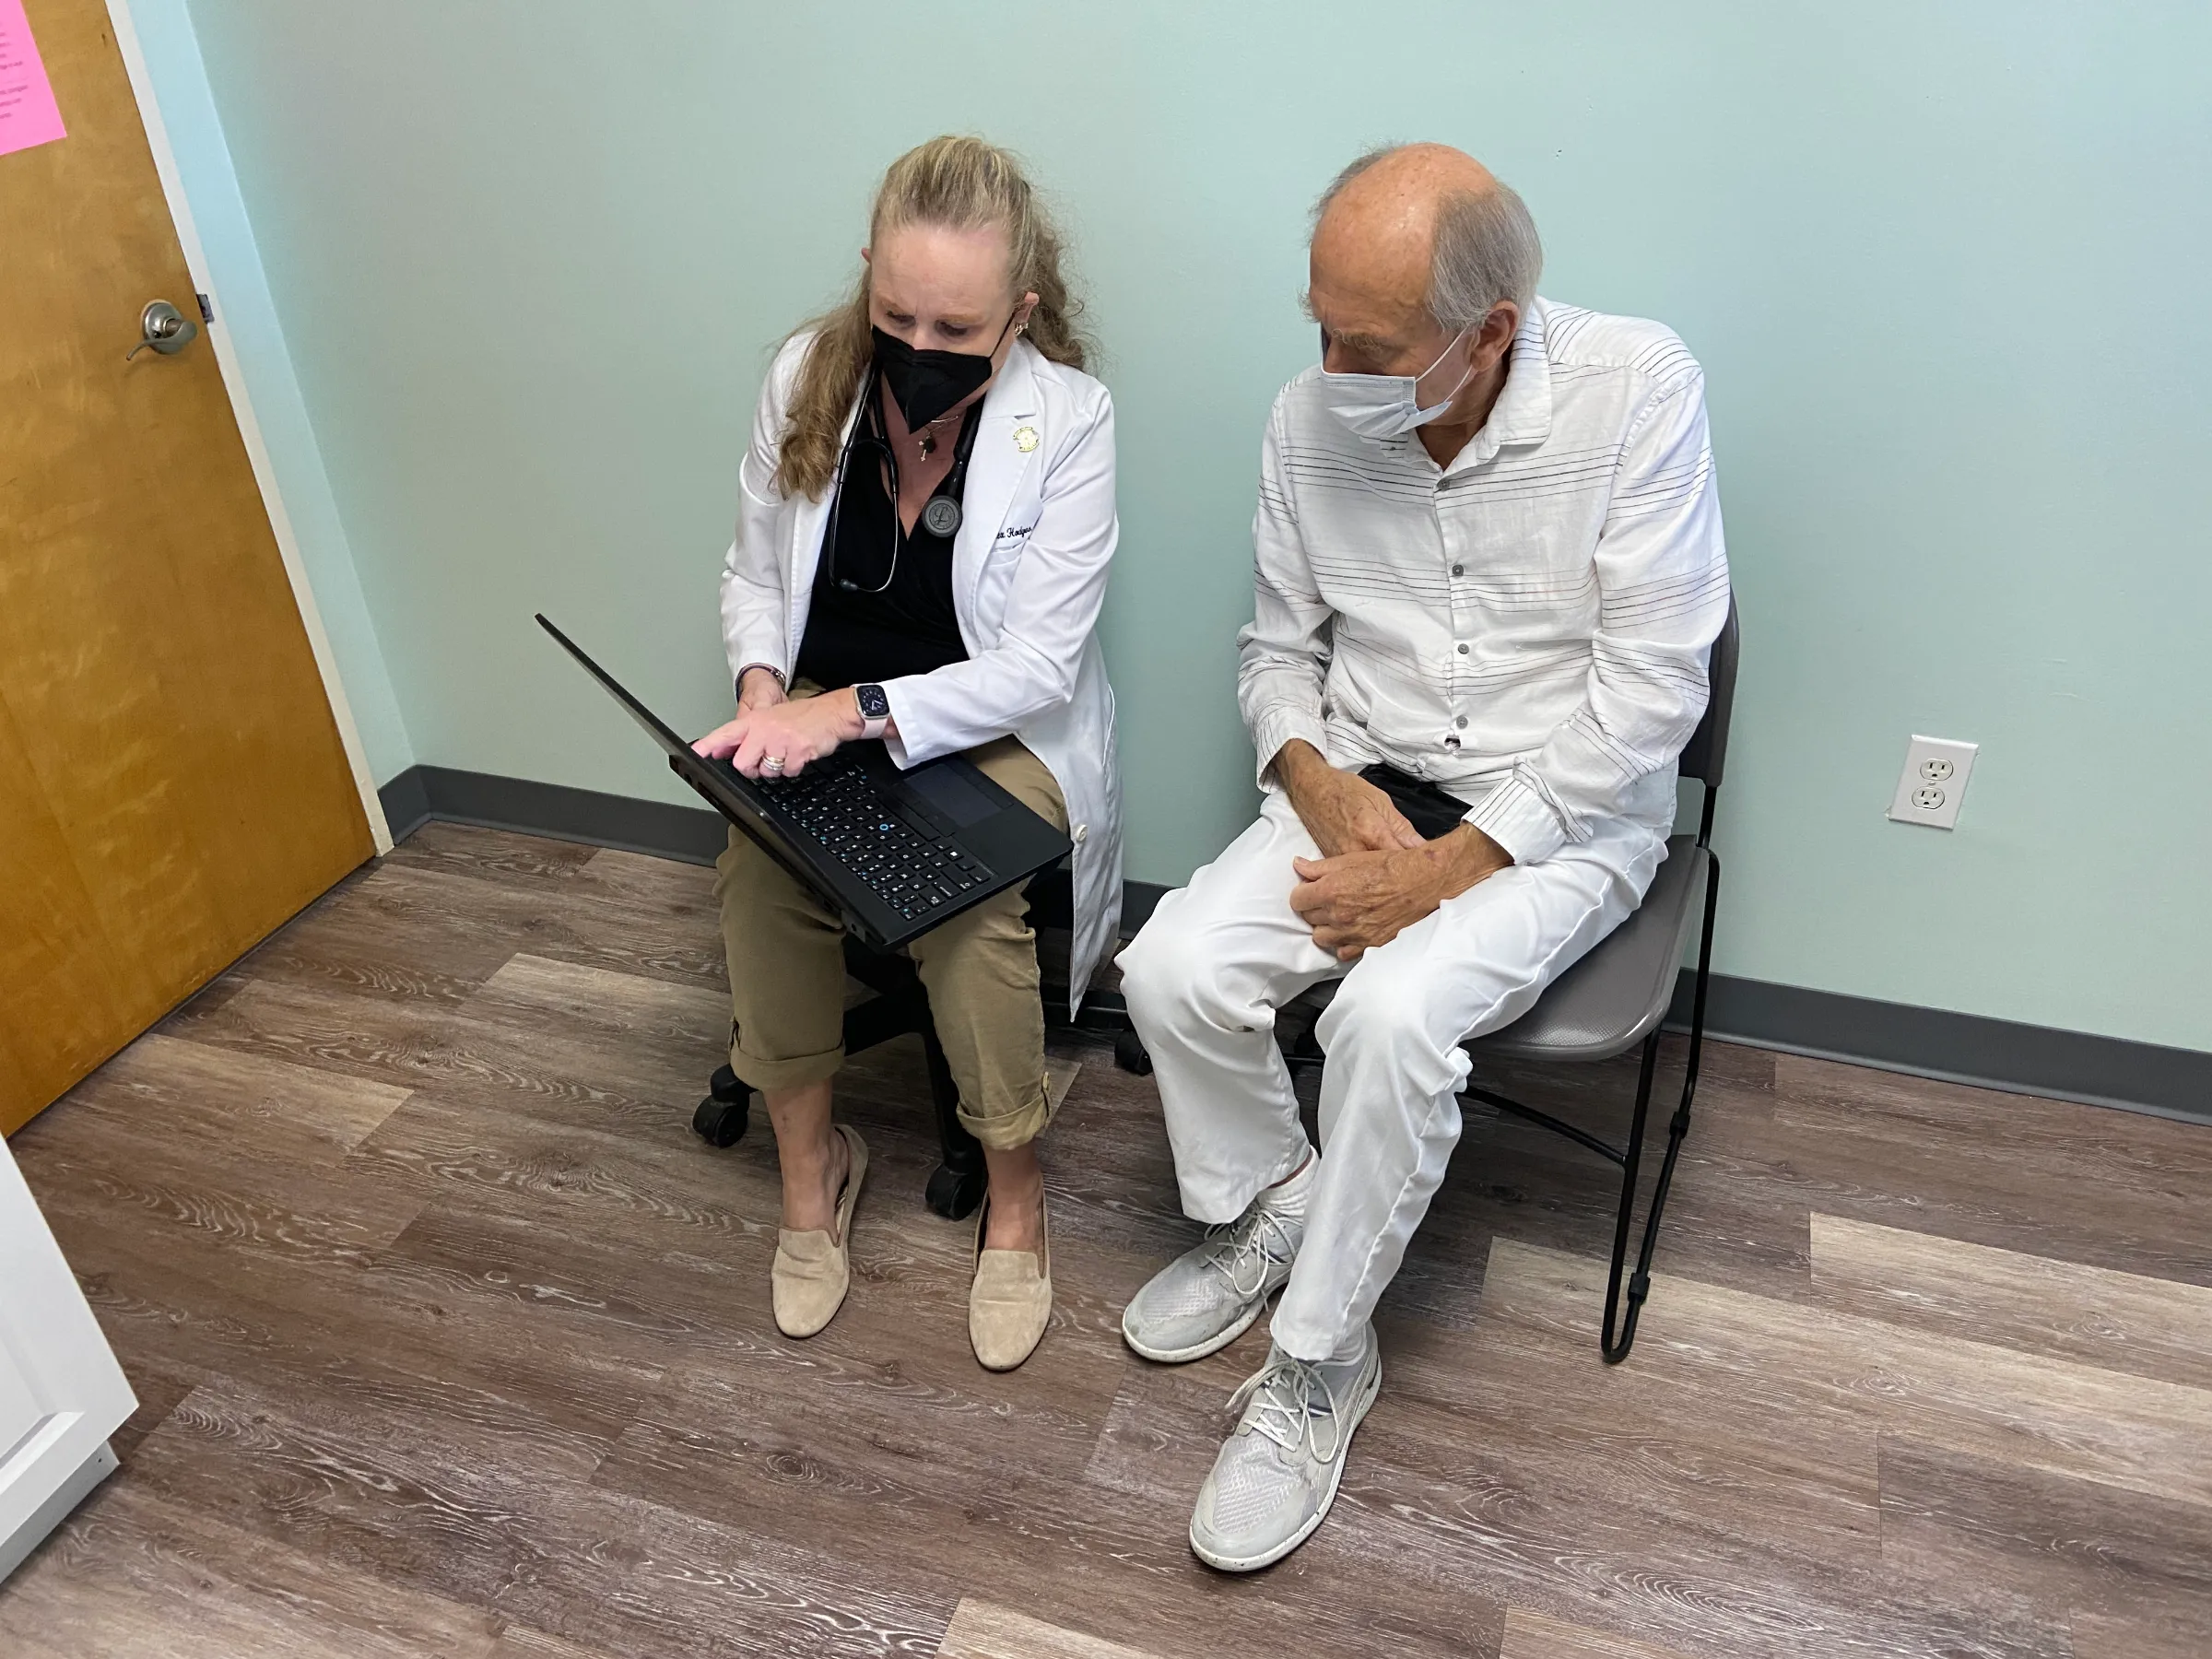 Nurse practitioner Alexis Hodges chats with patient Charles Nathaniel Smith at the Community Care Clinic of Dare in Nags Head, North Carolina, USA, September 7, 2022. Thomson Reuters Foundation/David Sherfinski